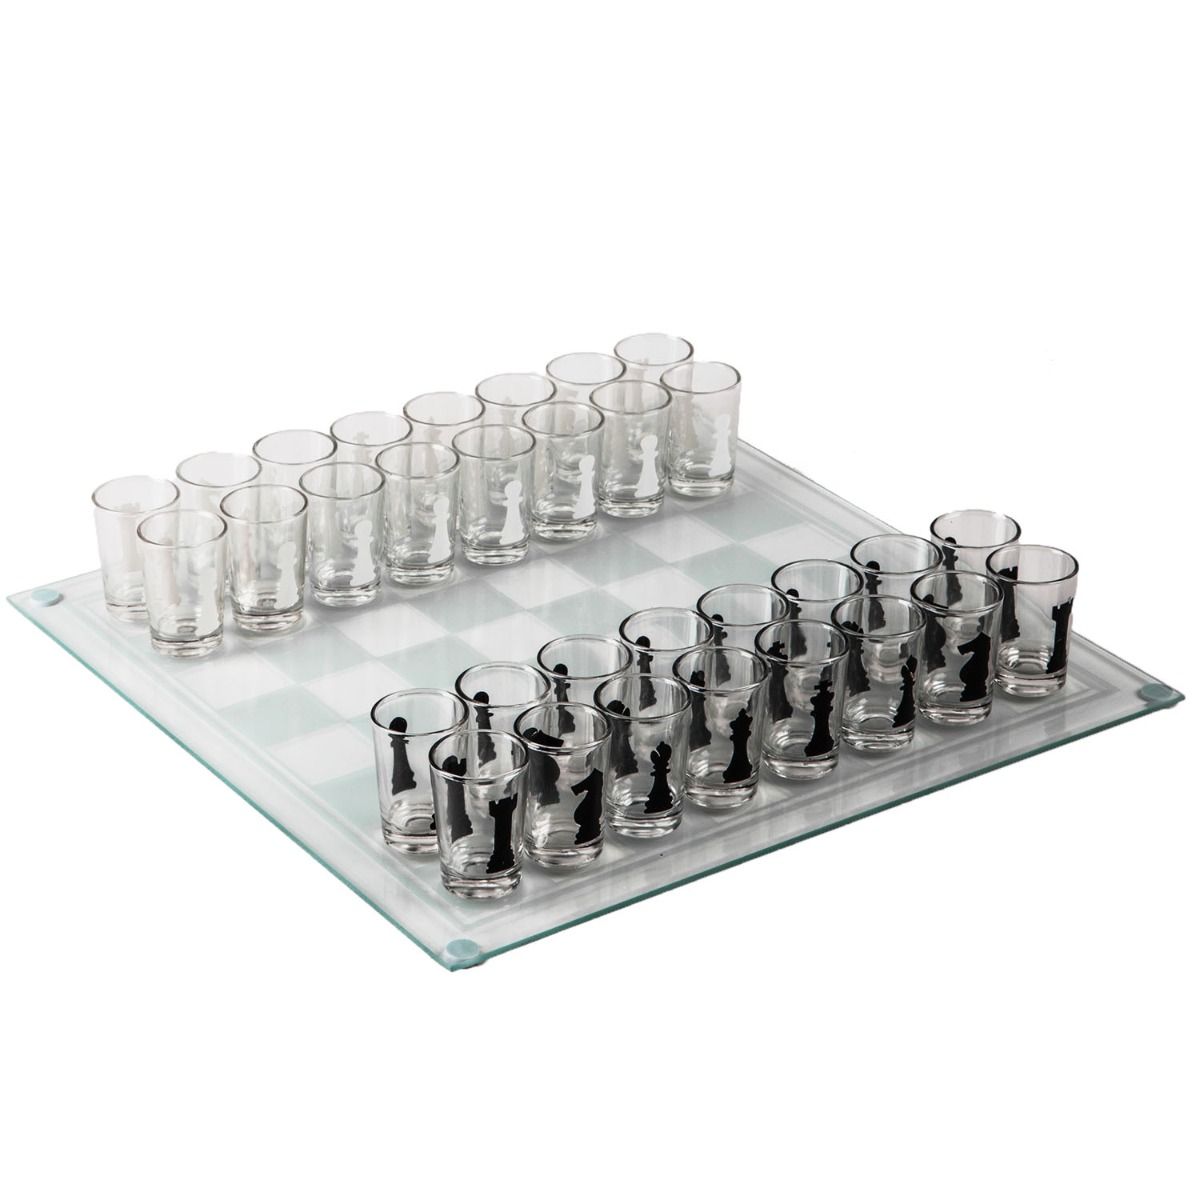 Glass Chess Drinking Game